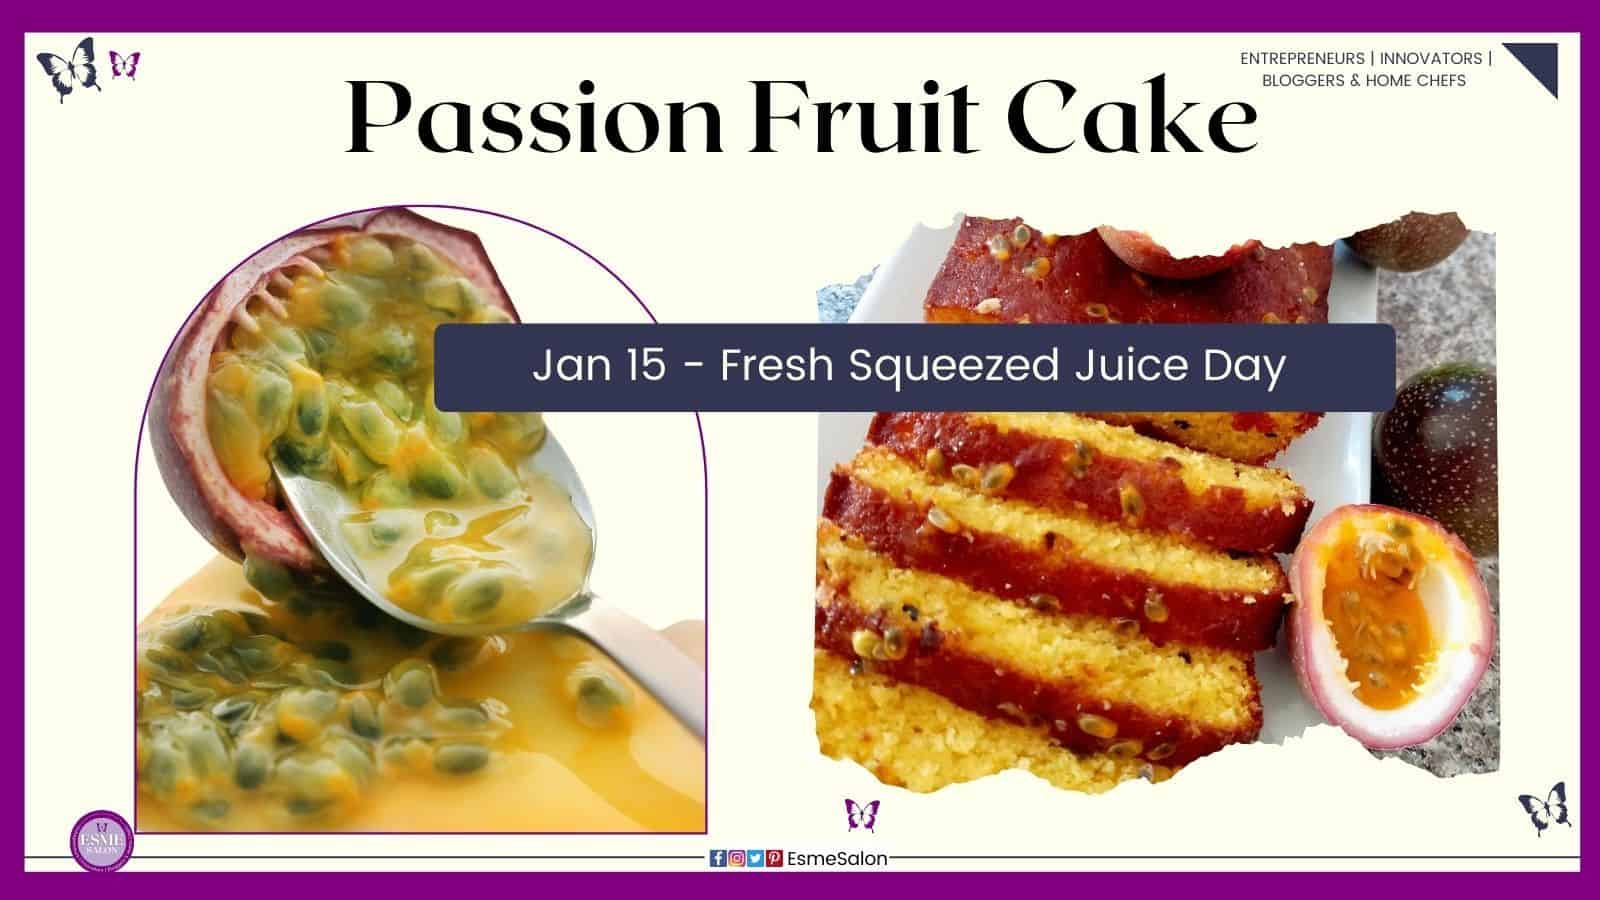 an image of a Passion Fruit Cake sliced up with cut up fresh passion fruit on the side.